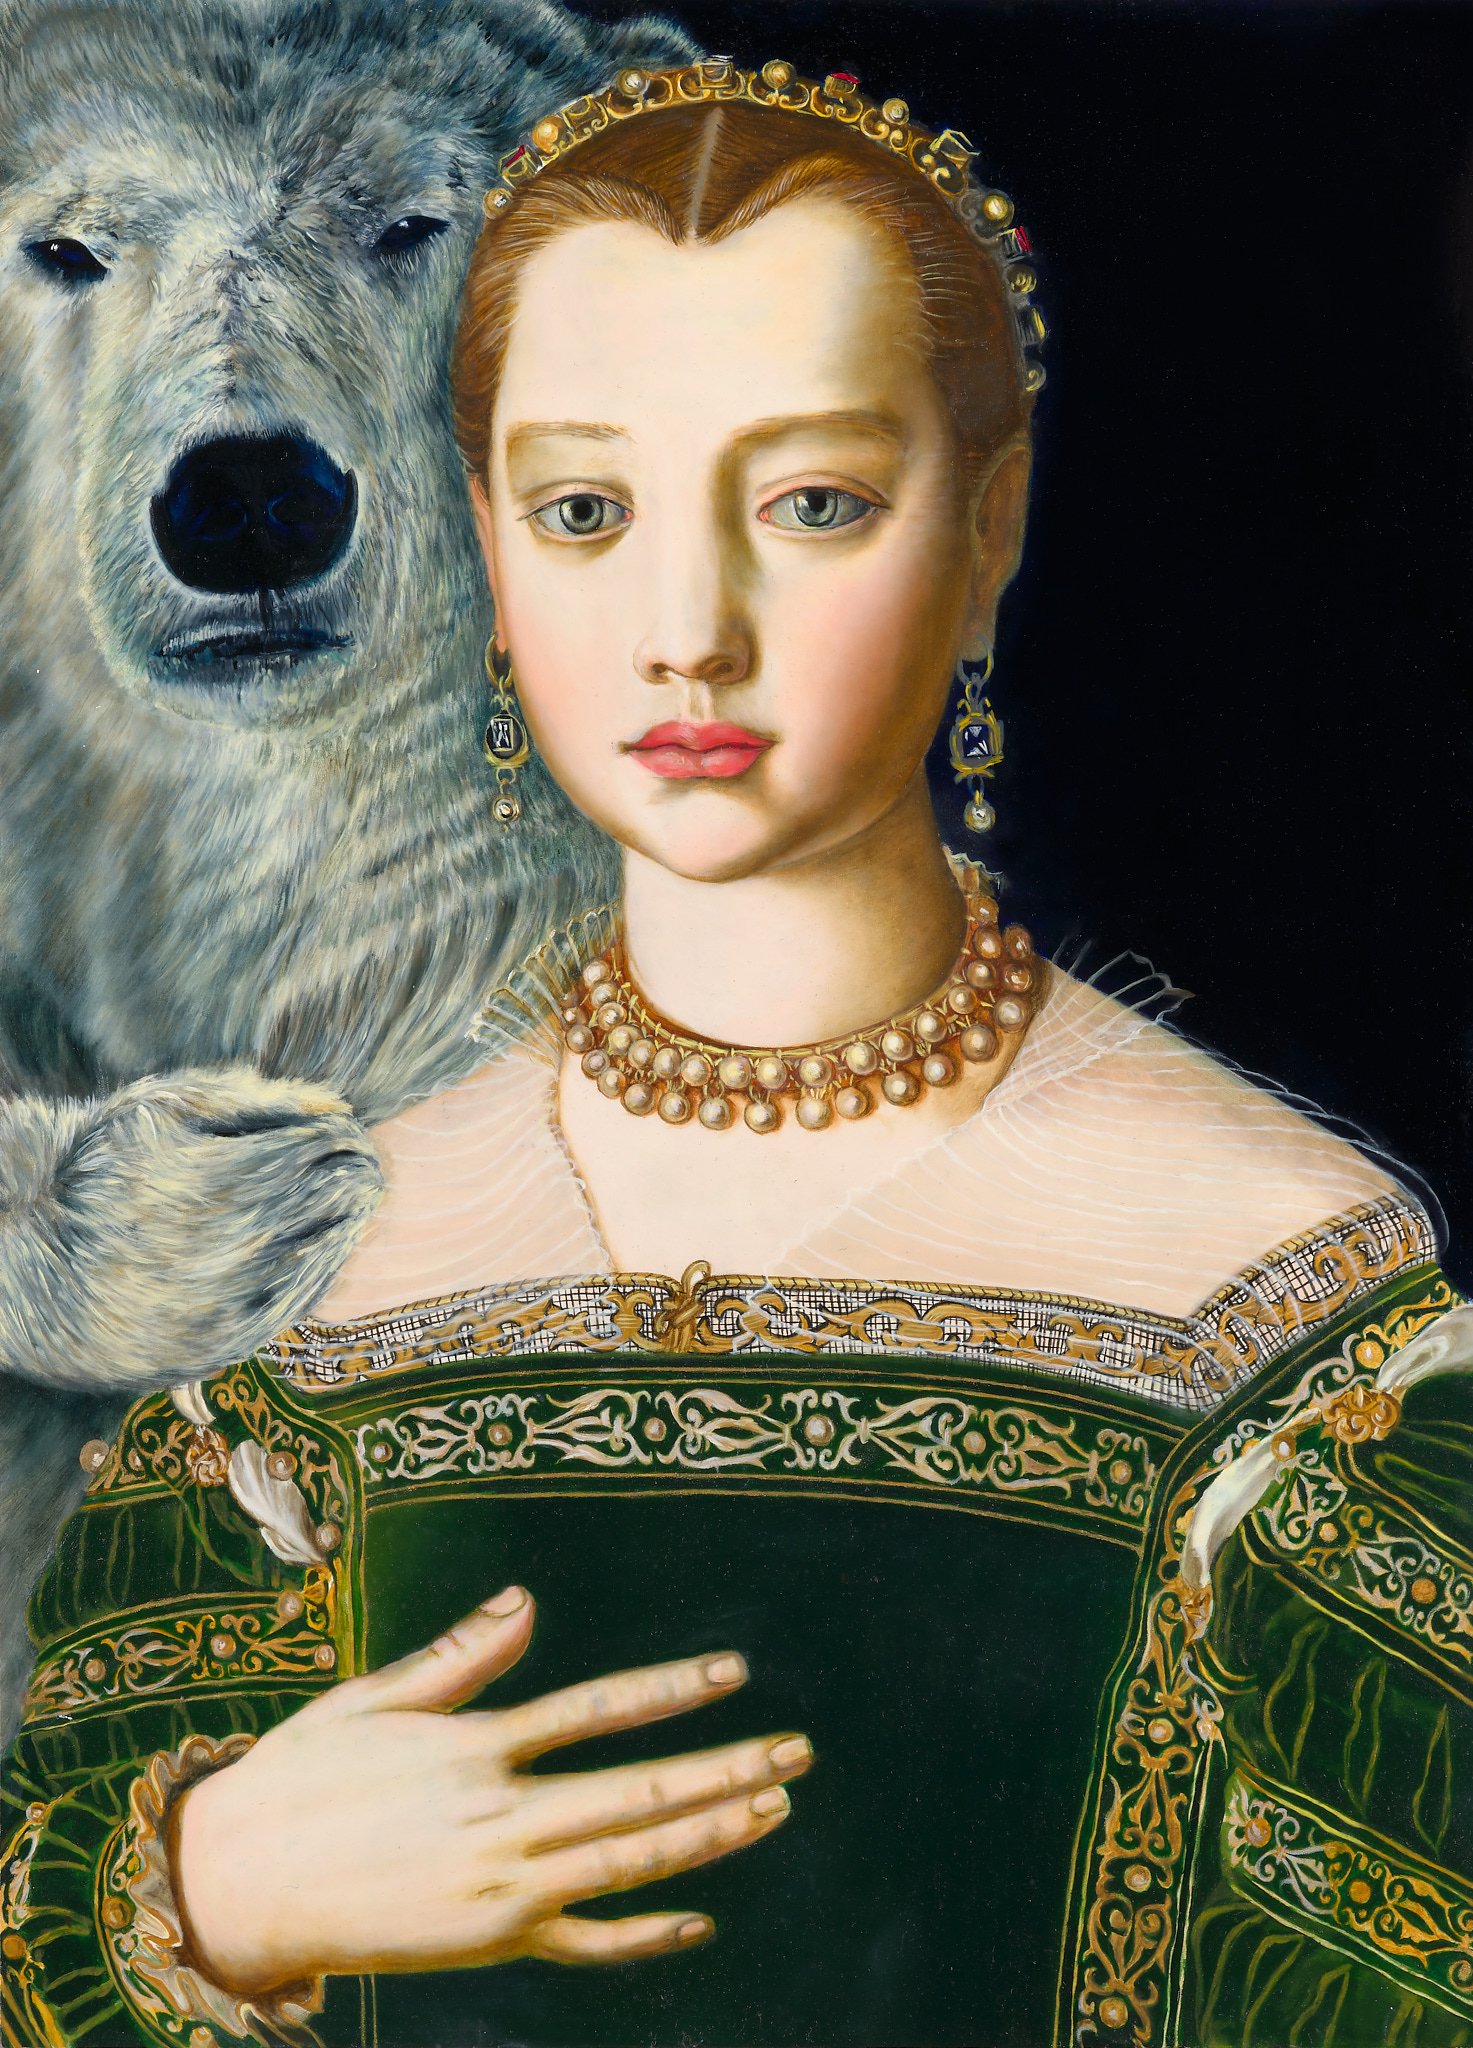    Aurora Imbued Mother Bear Shepherds Maria de Medici’s Young Transition    oil on panel  15 x 20.5 inches  2021  &nbsp;  I, polar bear, am laying on a white snowy plain. If you look closely in the clear night you’ll see a semi-circle line-up of us.